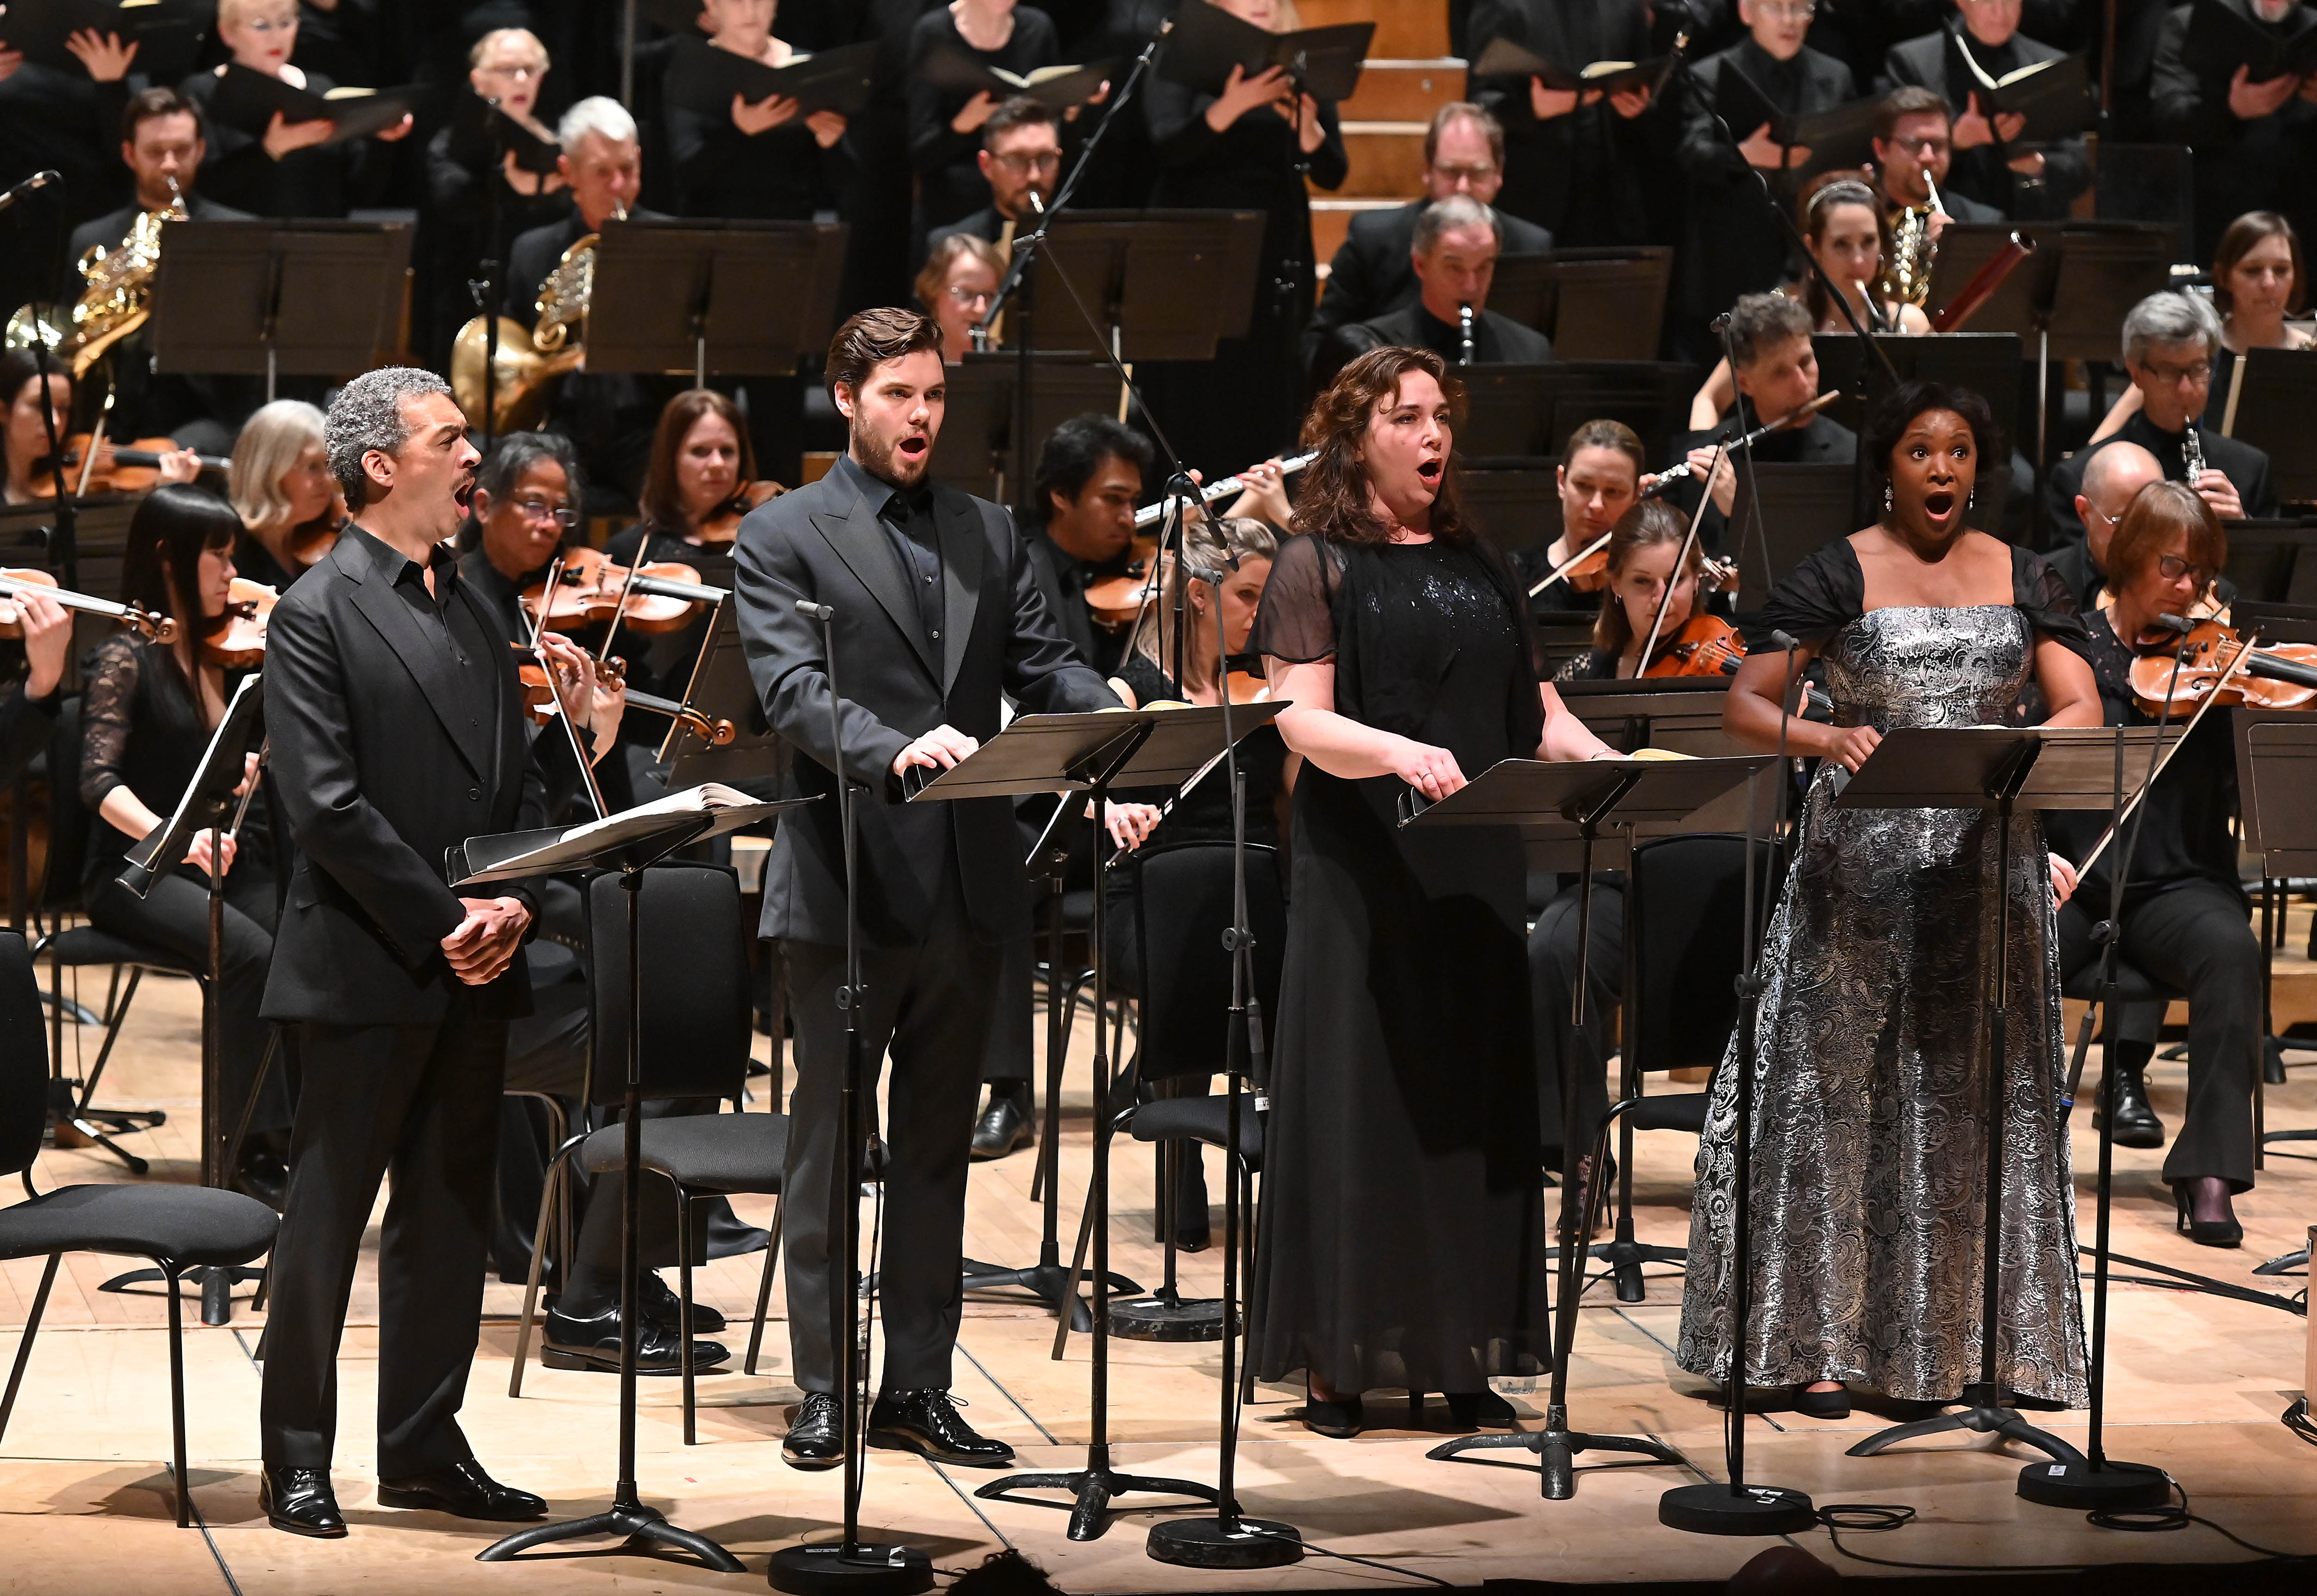 From left to right: Roderick Williams, Thomas Atkins, Christine Rice and Elizabeth Llewelyn in Beethoven's Missa solemnis